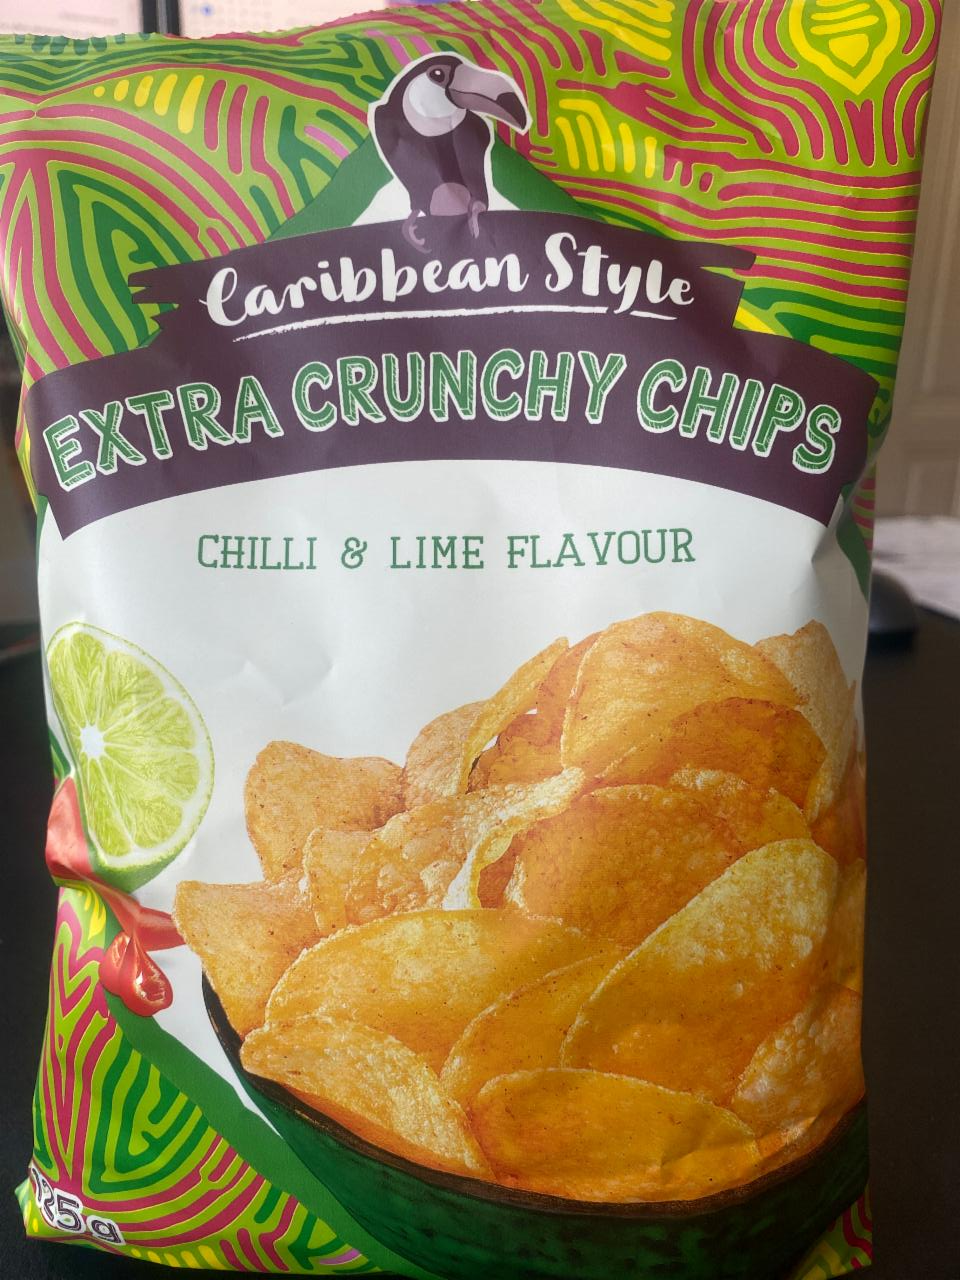 Fotografie - Caribbean Style extra crunchy chips chilli & lime flavour